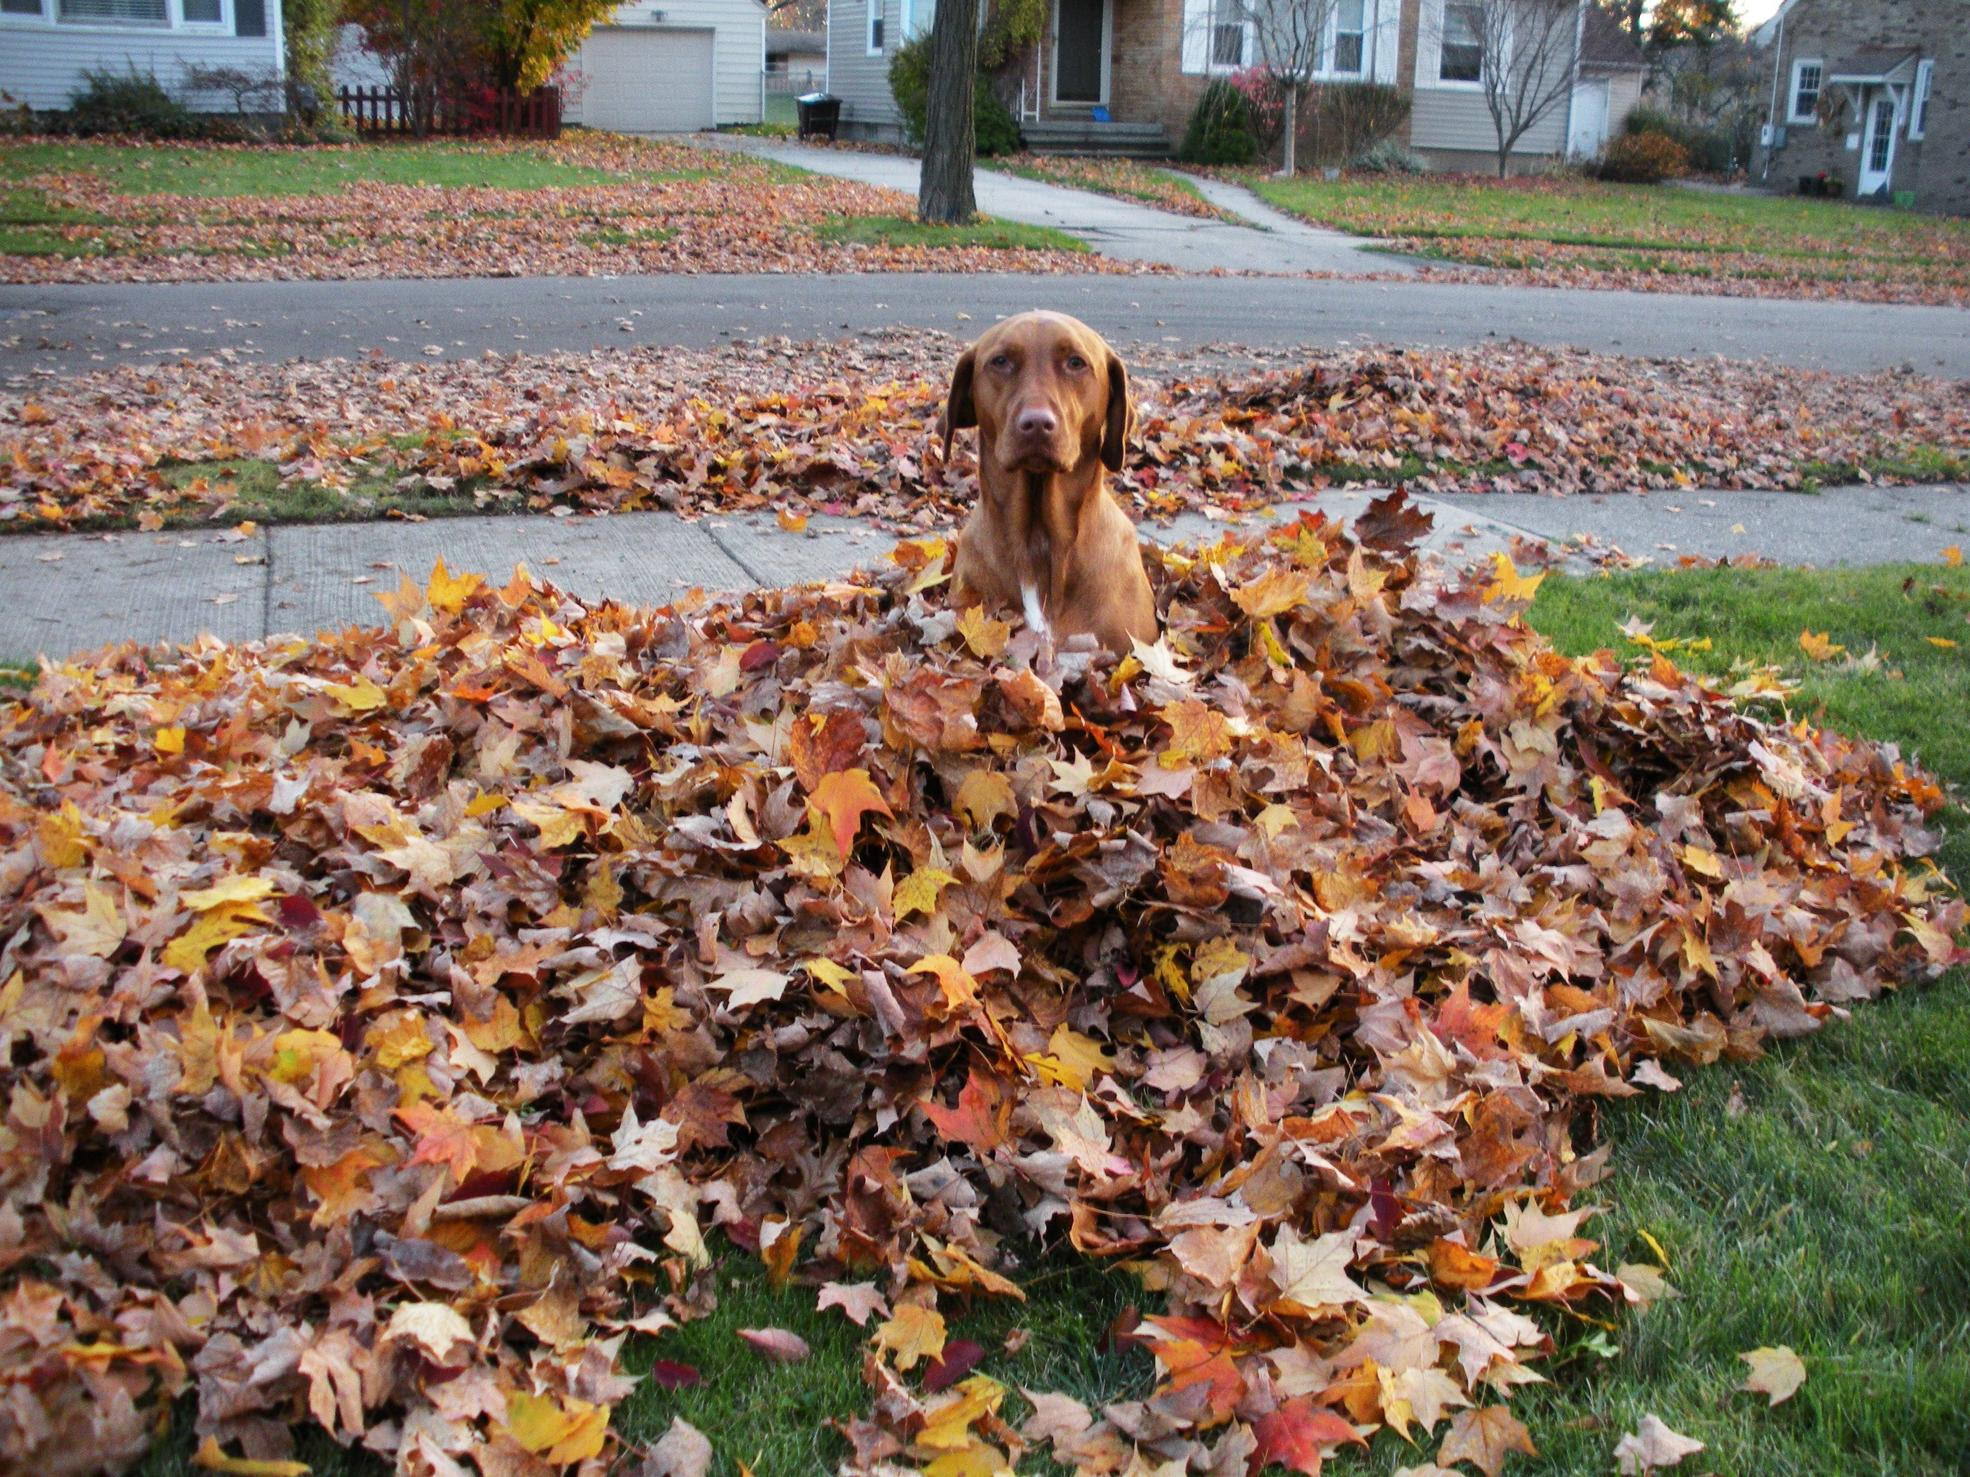 With the seasons changing, is there anything I should do to help my dog be comfortable TW5n5.130415